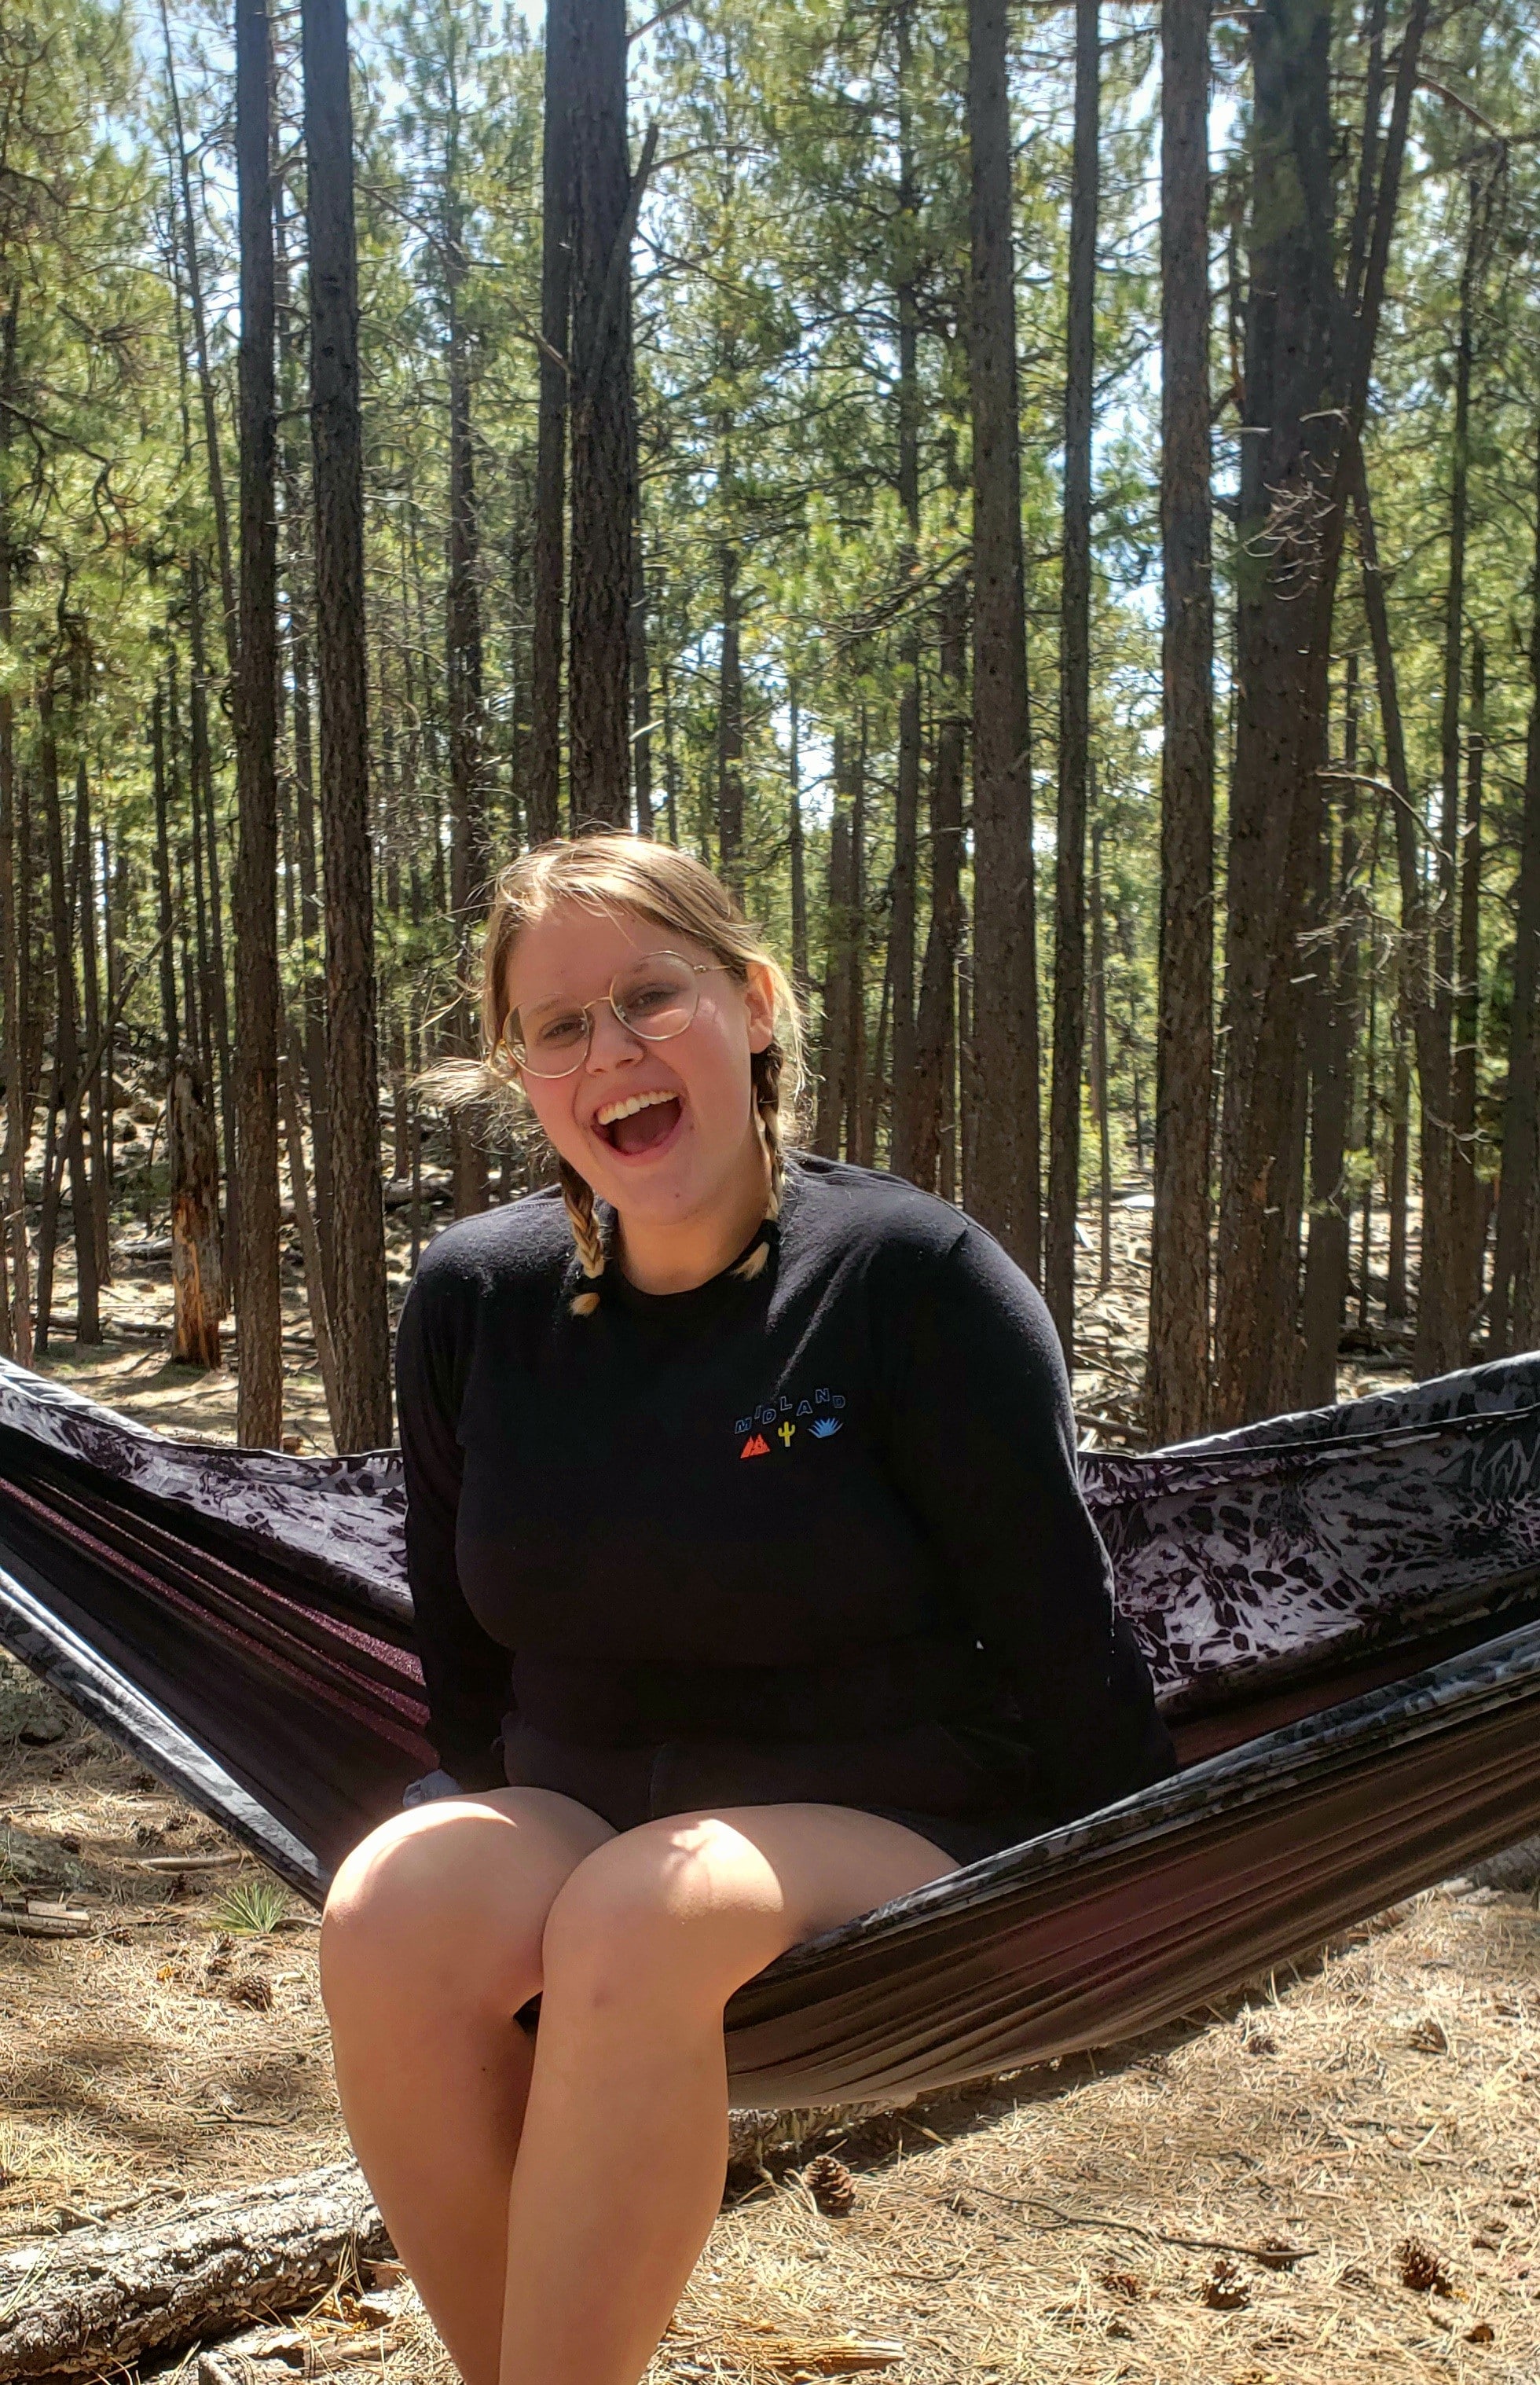 Rebekah Wucinich sitting in a hammock with the forest behind her